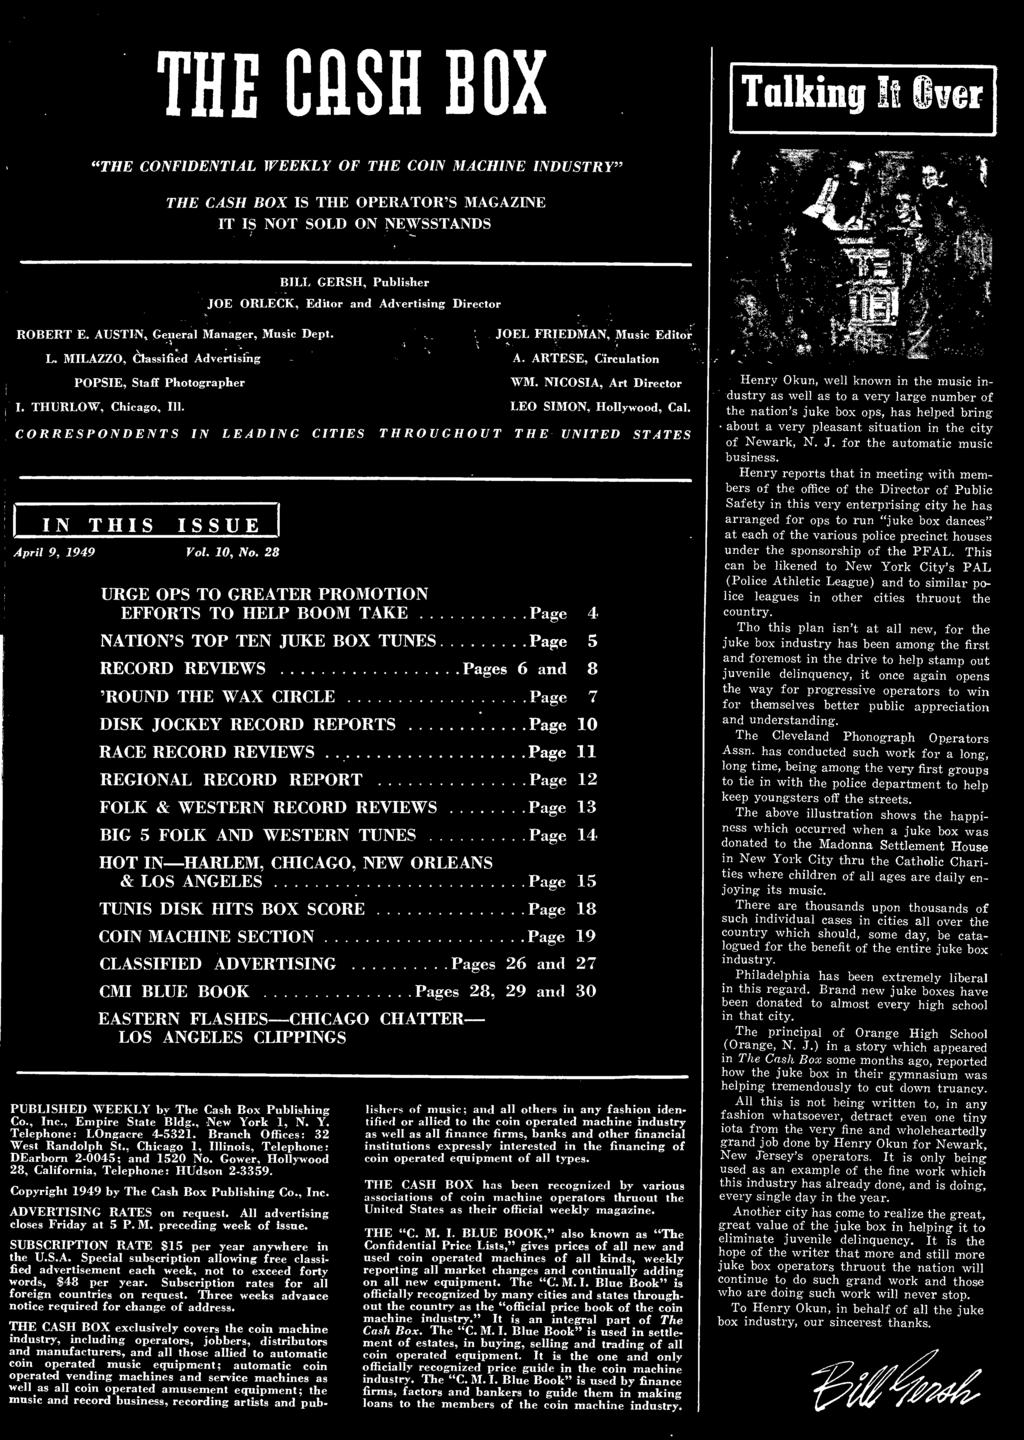 Page 12 FOLK & WESTERN RECORD REVIEWS Page 13 BIG 5 FOLK AND WESTERN TUNES Page 14 HOT IN HARLEM, CHICAGO, NEW ORLEANS & LOS ANGELES Page 15 TUNIS DISK HITS BOX SCORE Page 18 COIN MACHINE SECTION